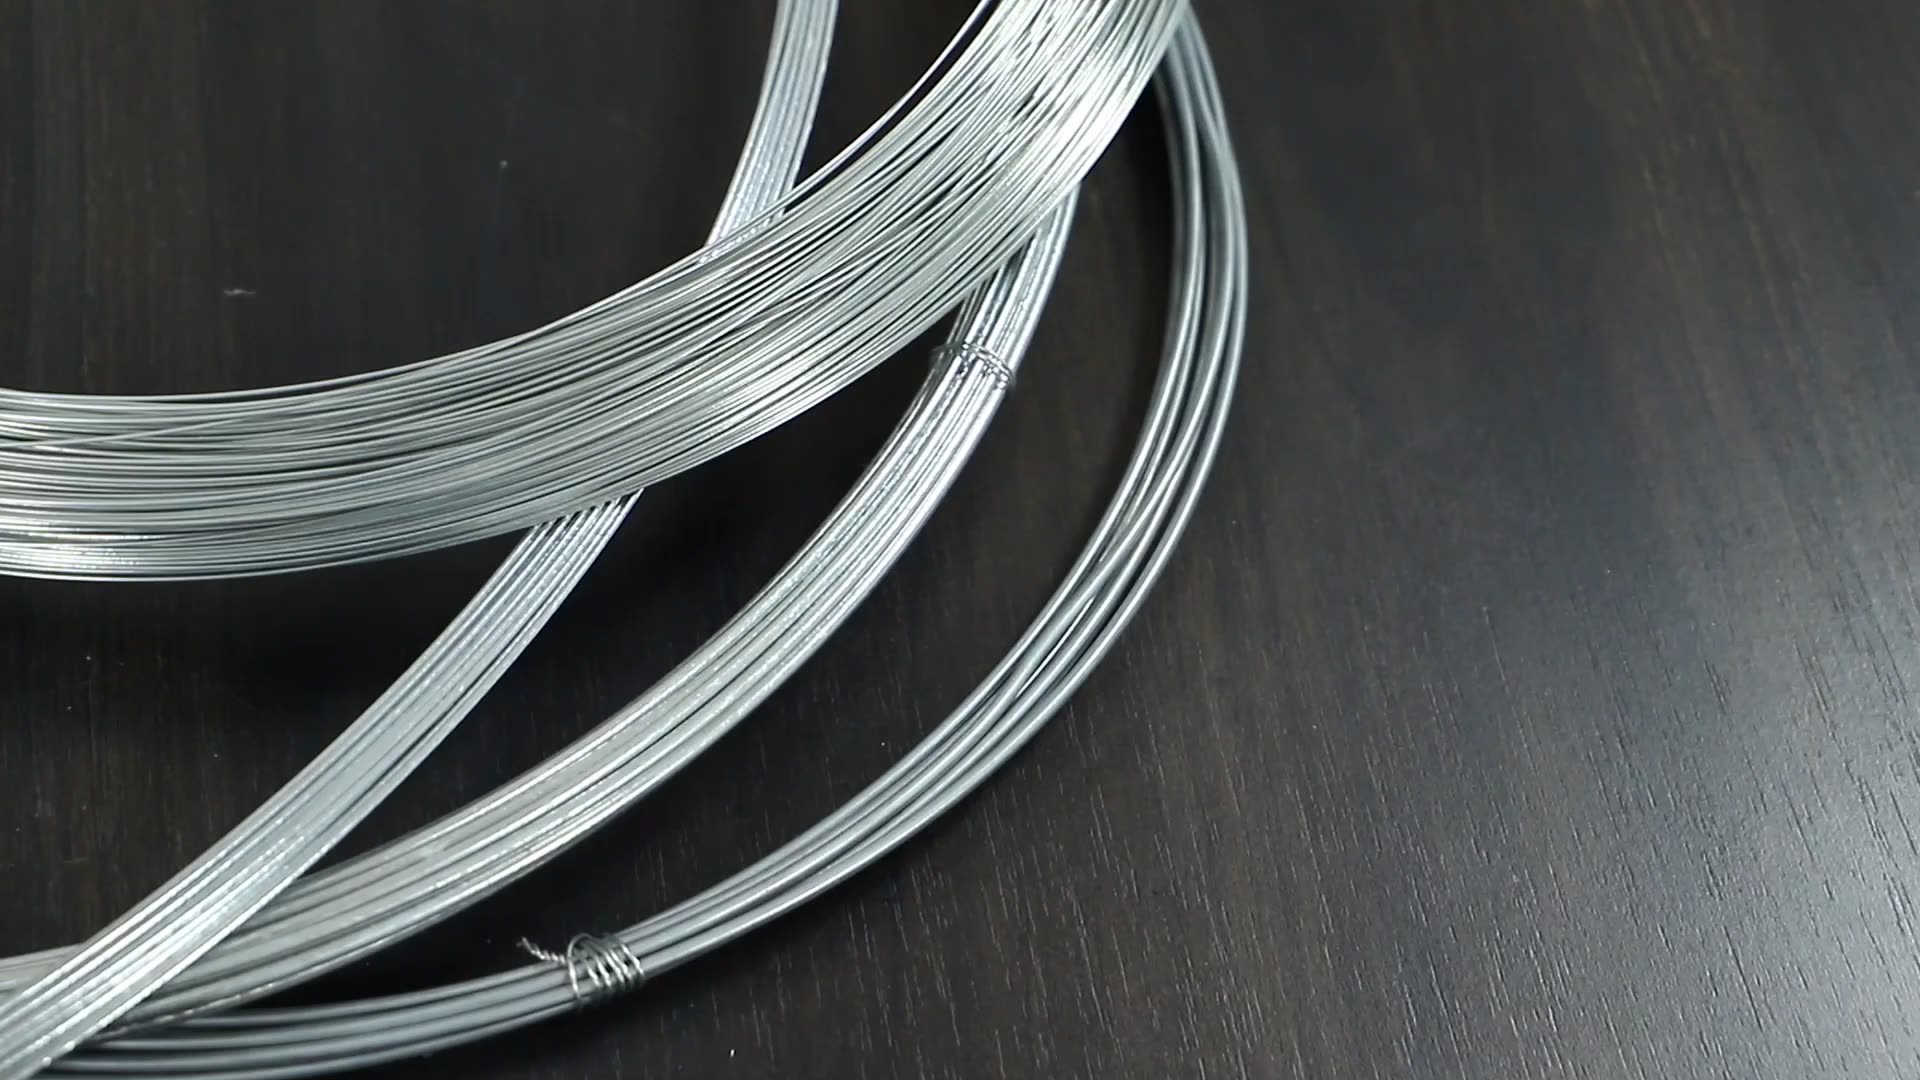 Looking to Buy Galvanized Steel Wire. Here are 10 Things to Know Before You Buy